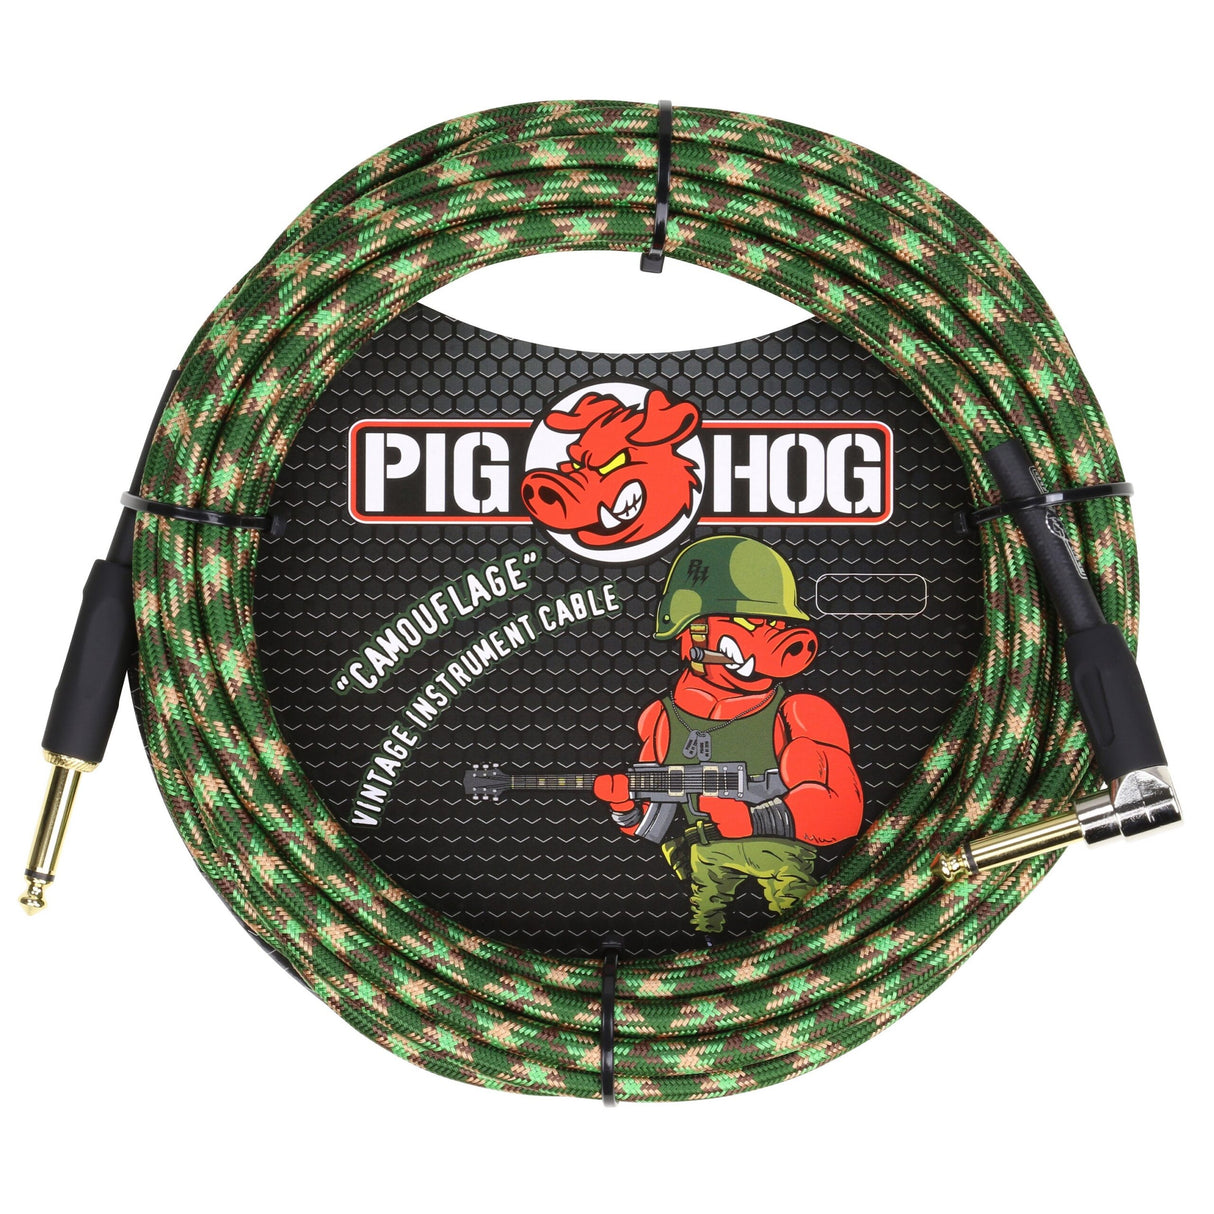 Pig Hog PCH20CFR "Camouflage" Instrument Cable, 20ft. Right Angle